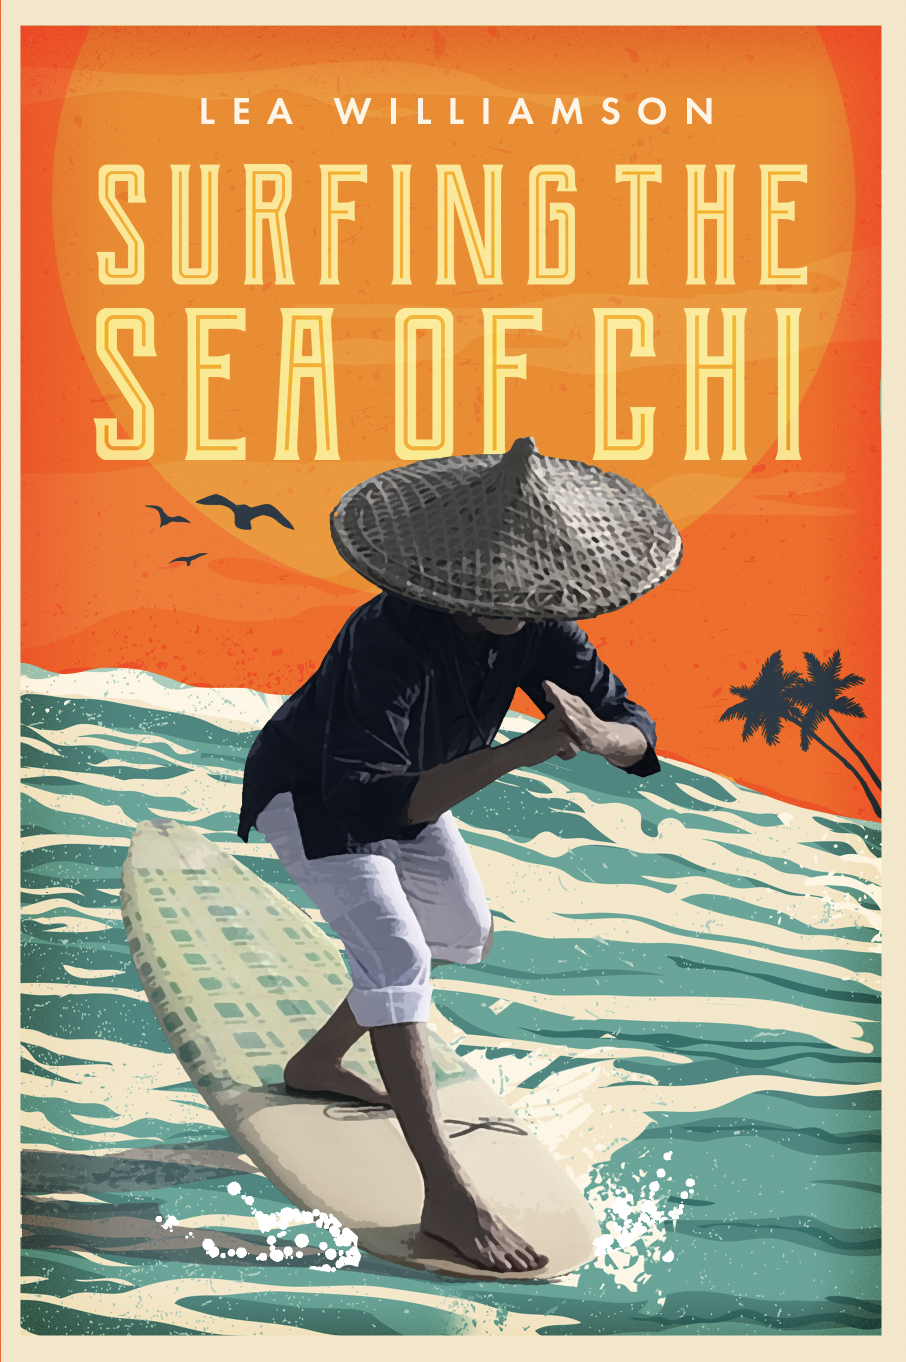 Book: Surfing the Sea of Chi-Signed & Shipped